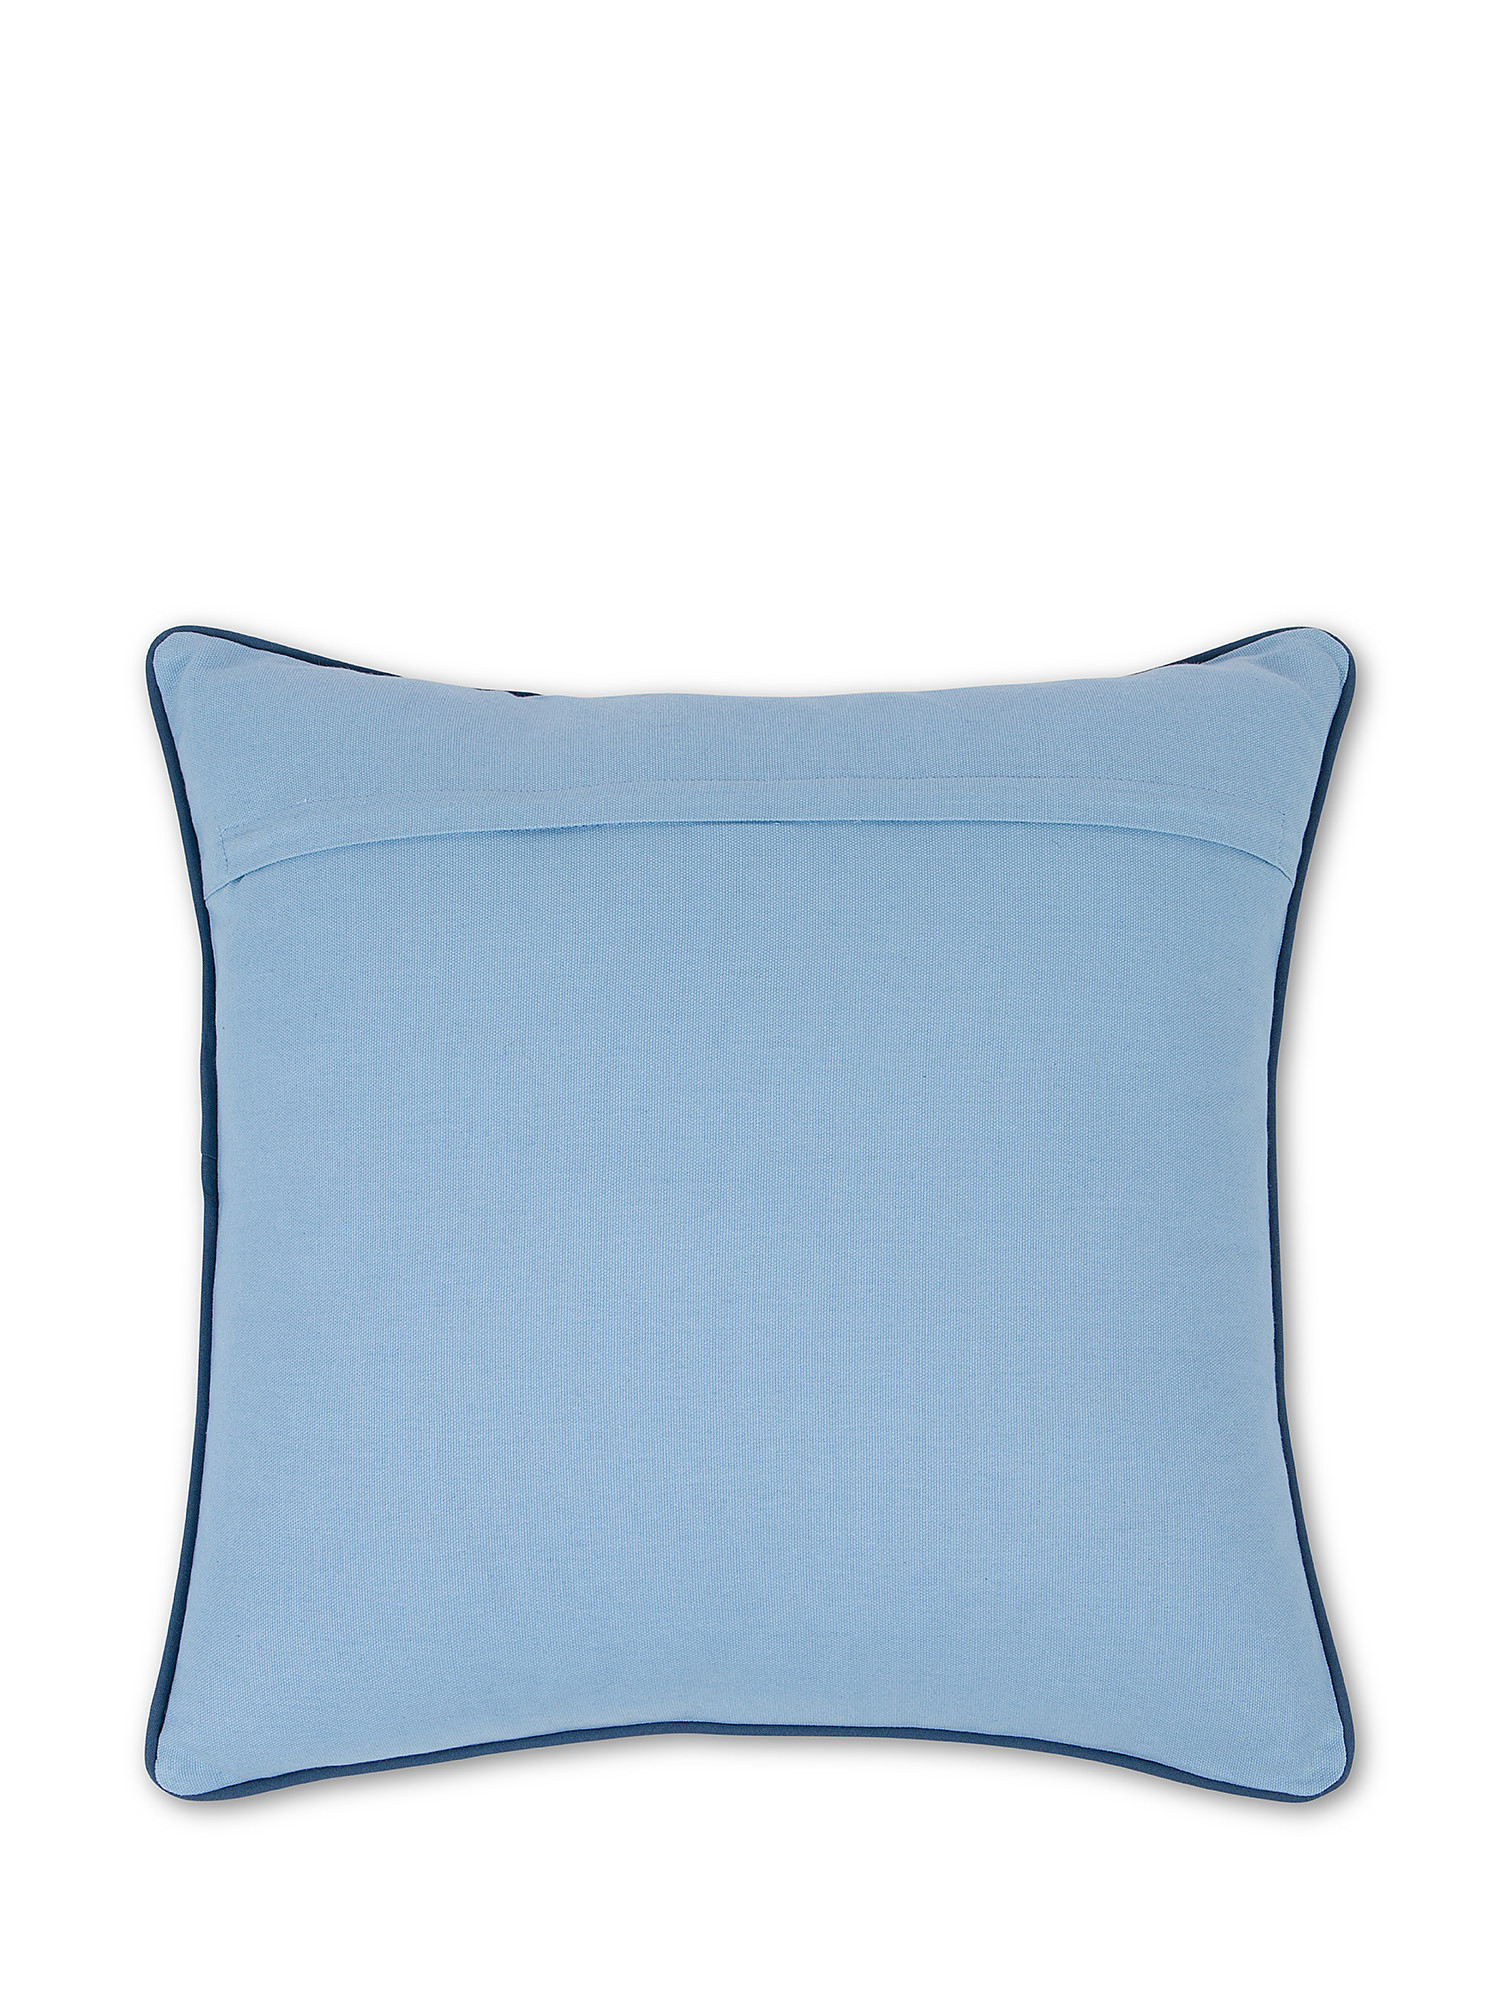 45x45 cm cushion with applications and embroidery, Light Blue, large image number 1